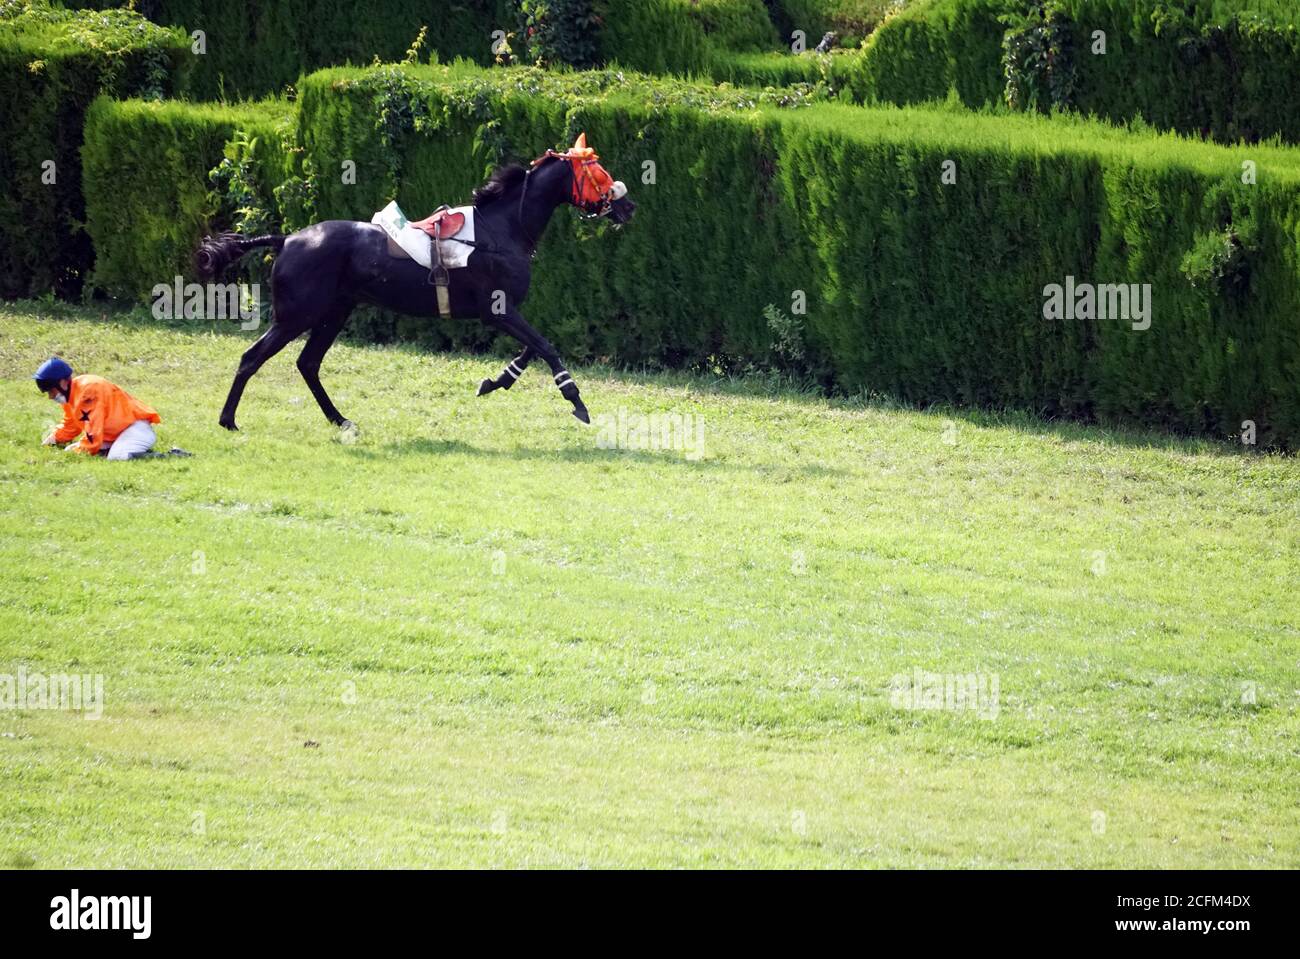 A jockey falling from a horse at the race while others running further at the race in Merano, Italy on Sept. 6th of 2020. Stock Photo